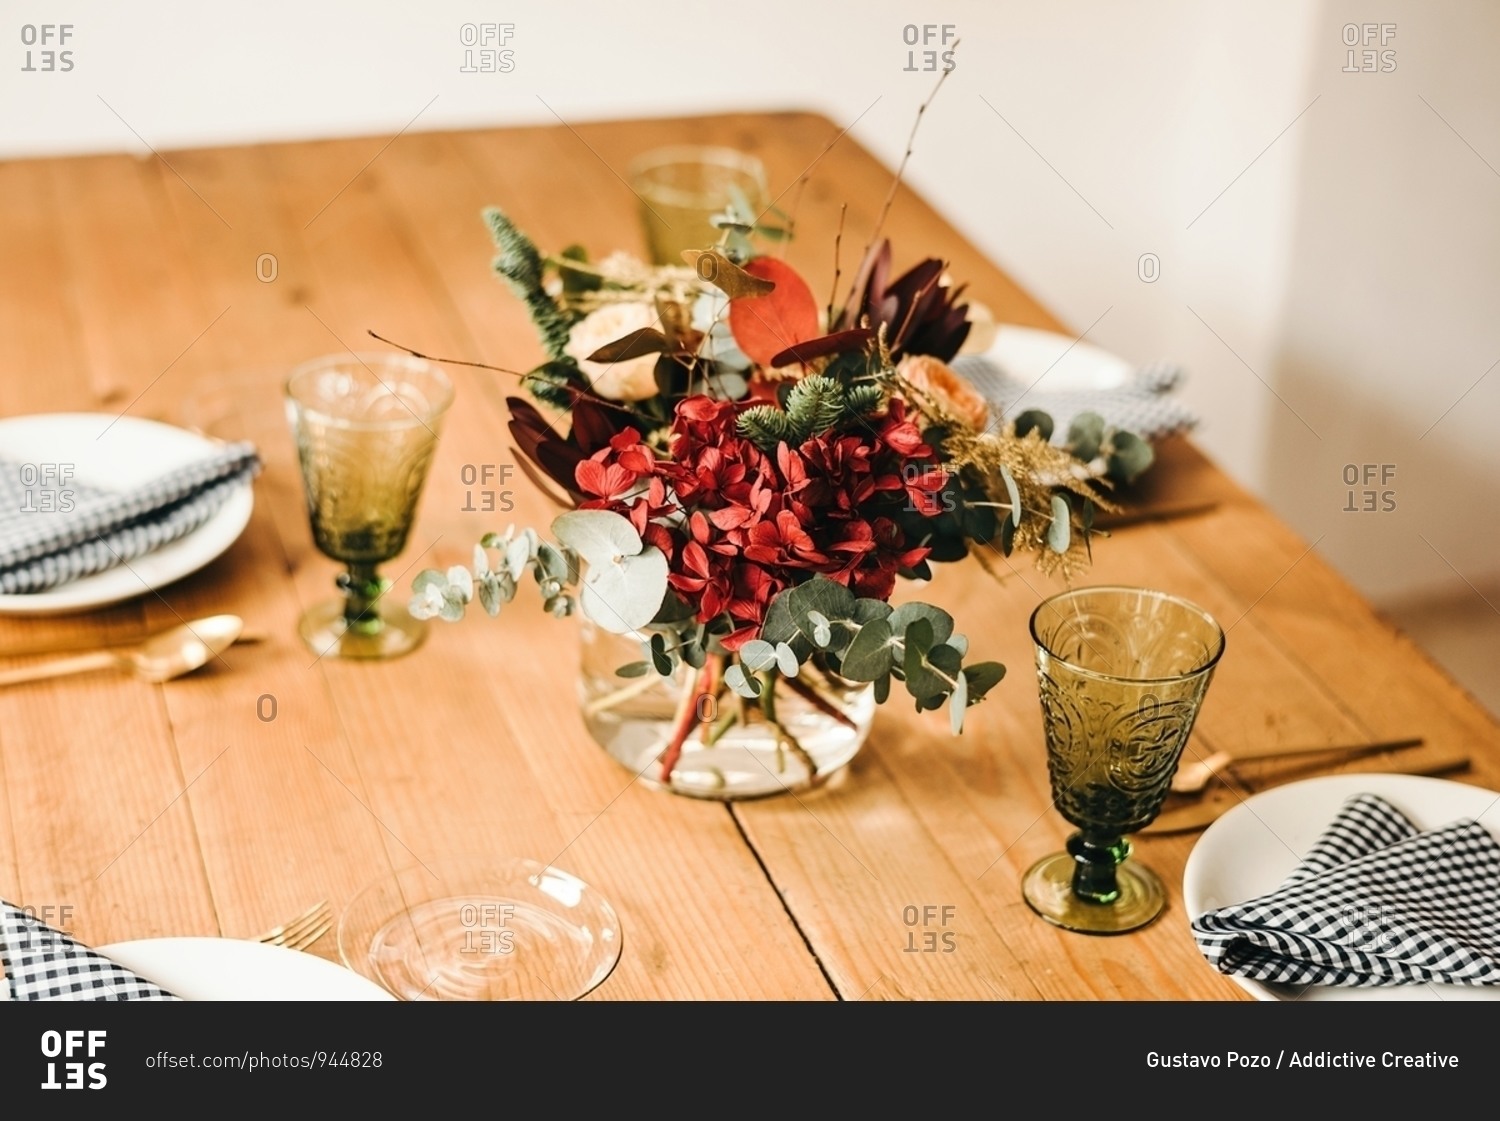 From above bouquet of miscellaneous flowers and green plant twigs in vase with water on a wooden table set for a meal